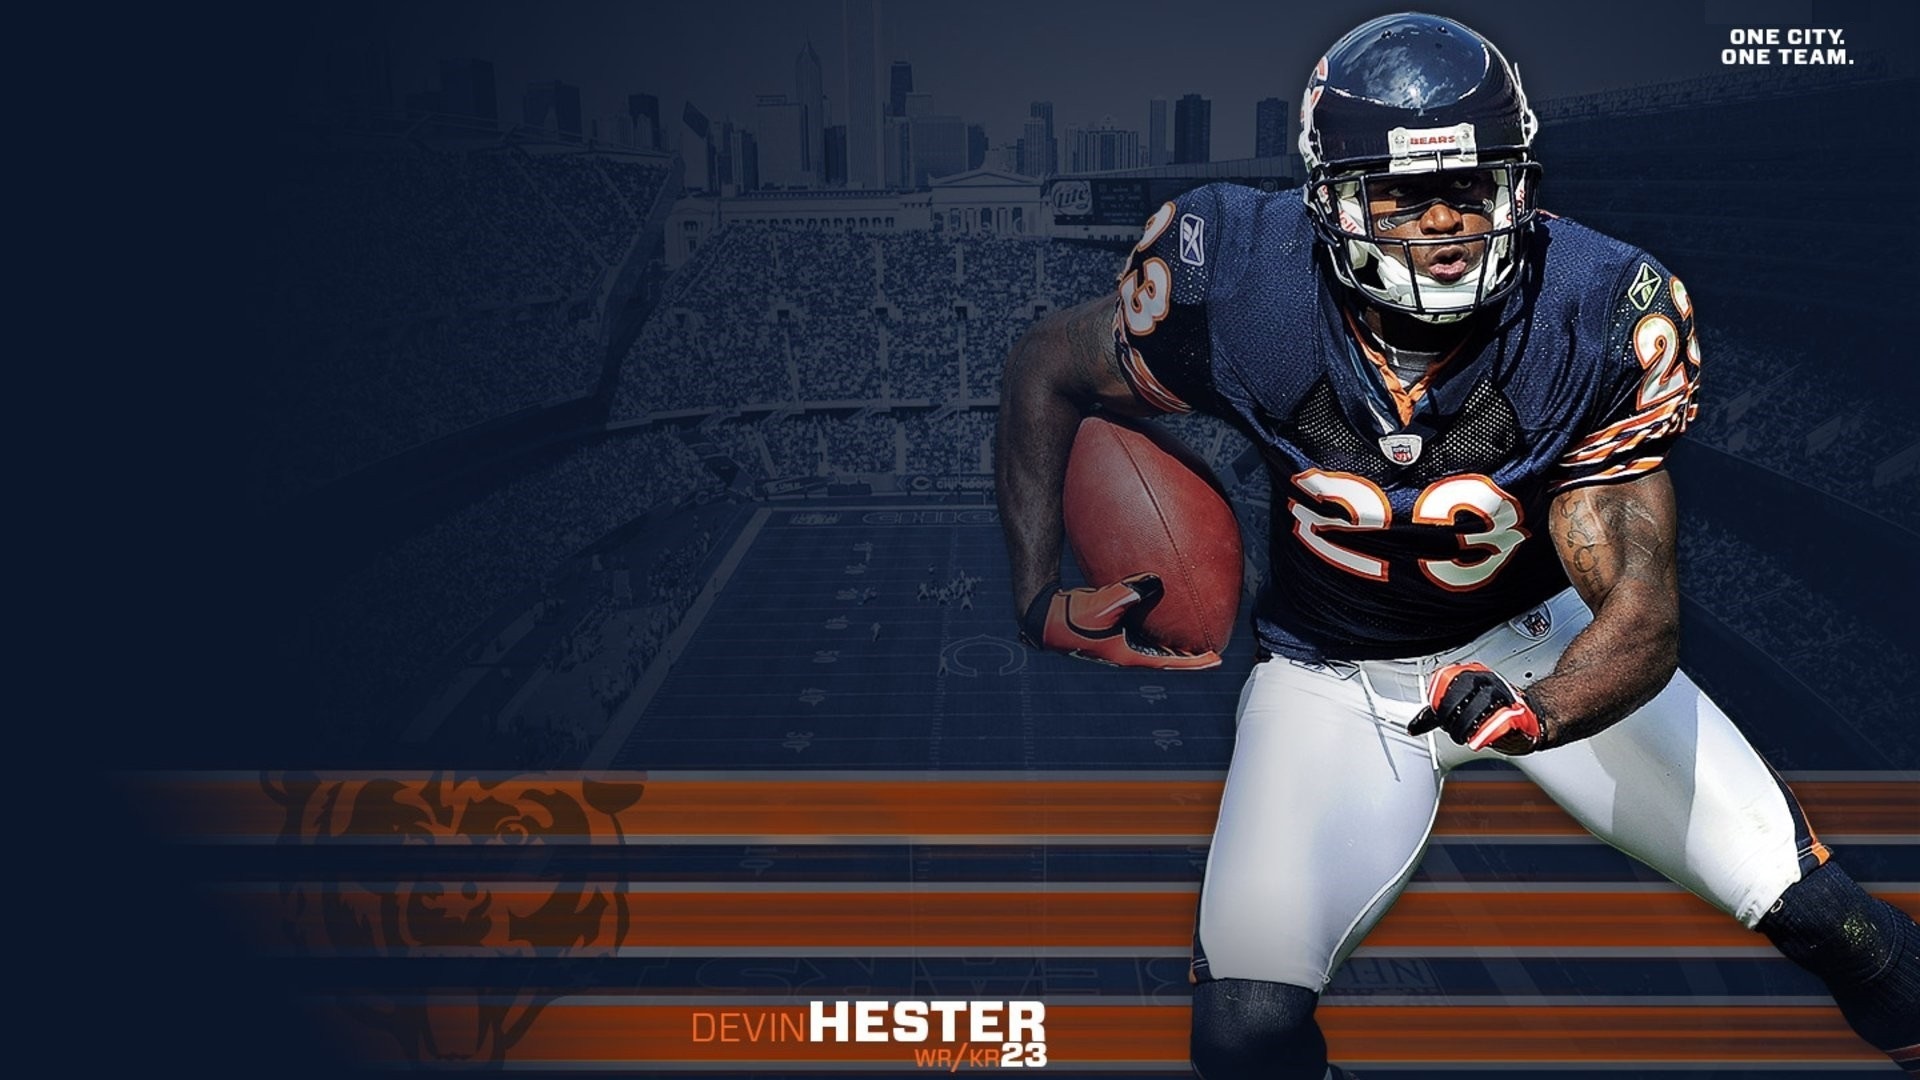 Wallpaper Desktop Chicago Bears NFL HD With high-resolution 1920X1080 pixel. You can use this wallpaper for your Mac or Windows Desktop Background, iPhone, Android or Tablet and another Smartphone device